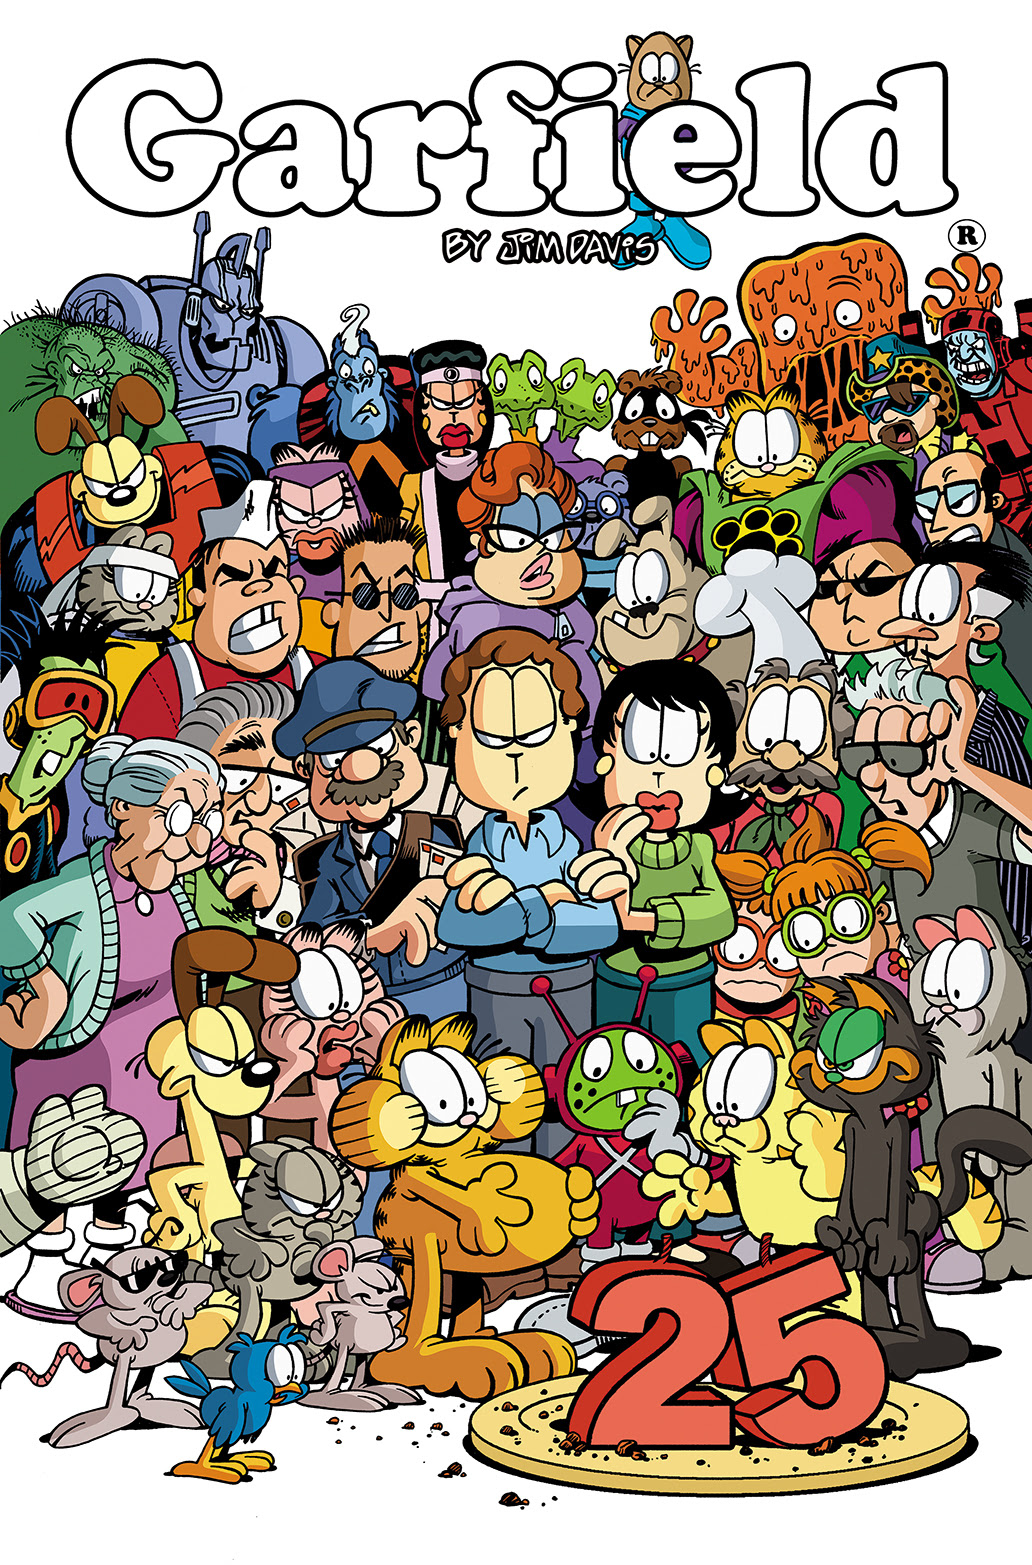 GARFIELD #25 Cover A by Gary Barker